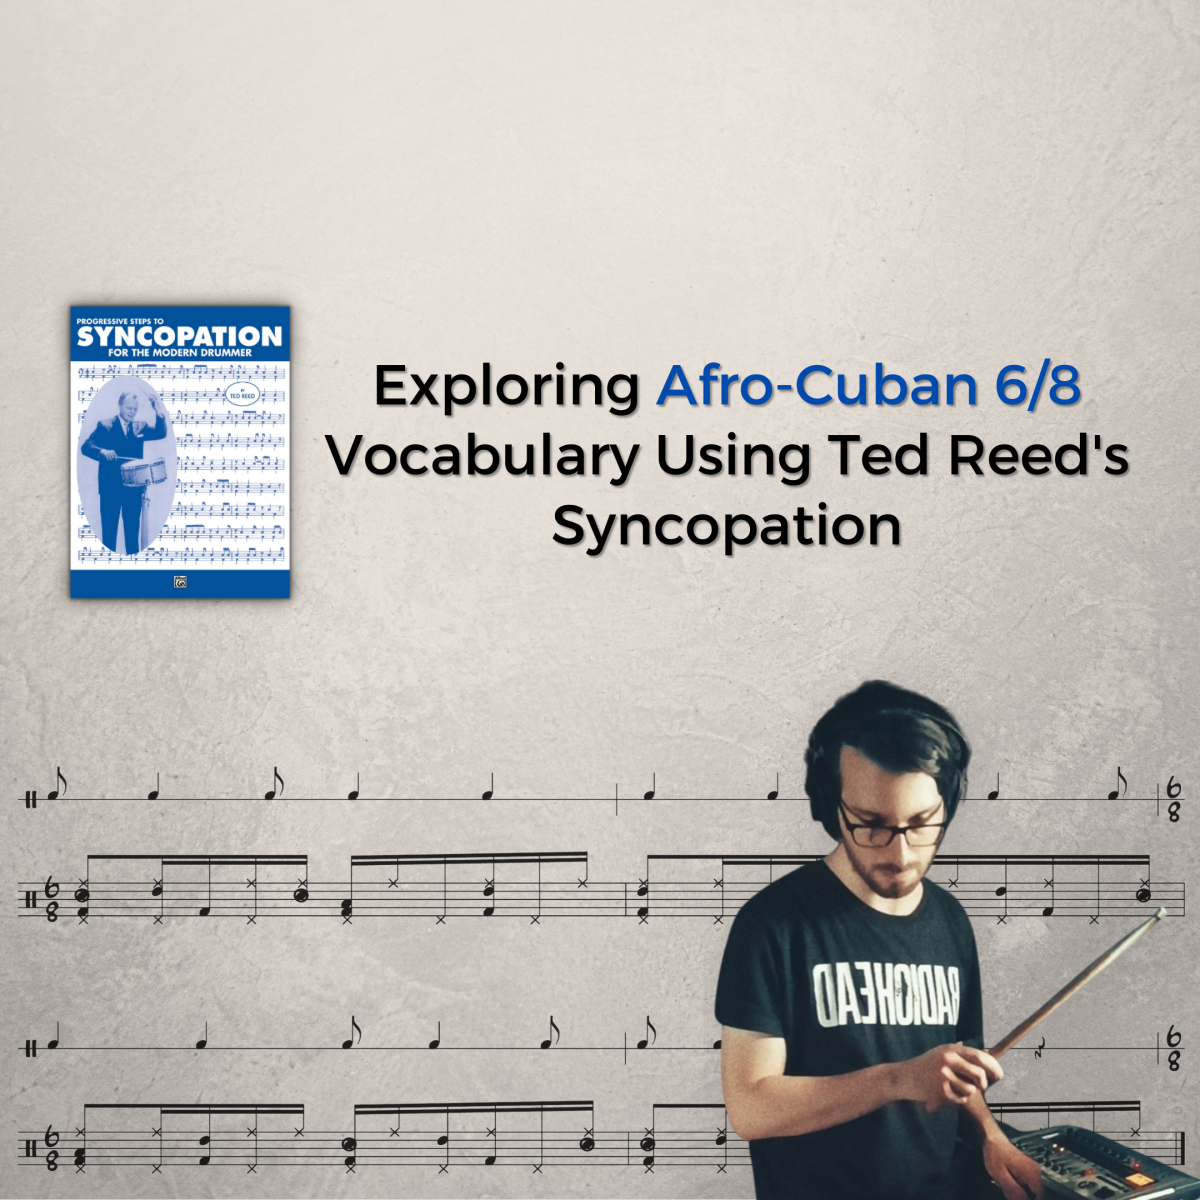 Exploring Afro-Cuban 6/8 Vocabulary Using Ted Reed’s Syncopation